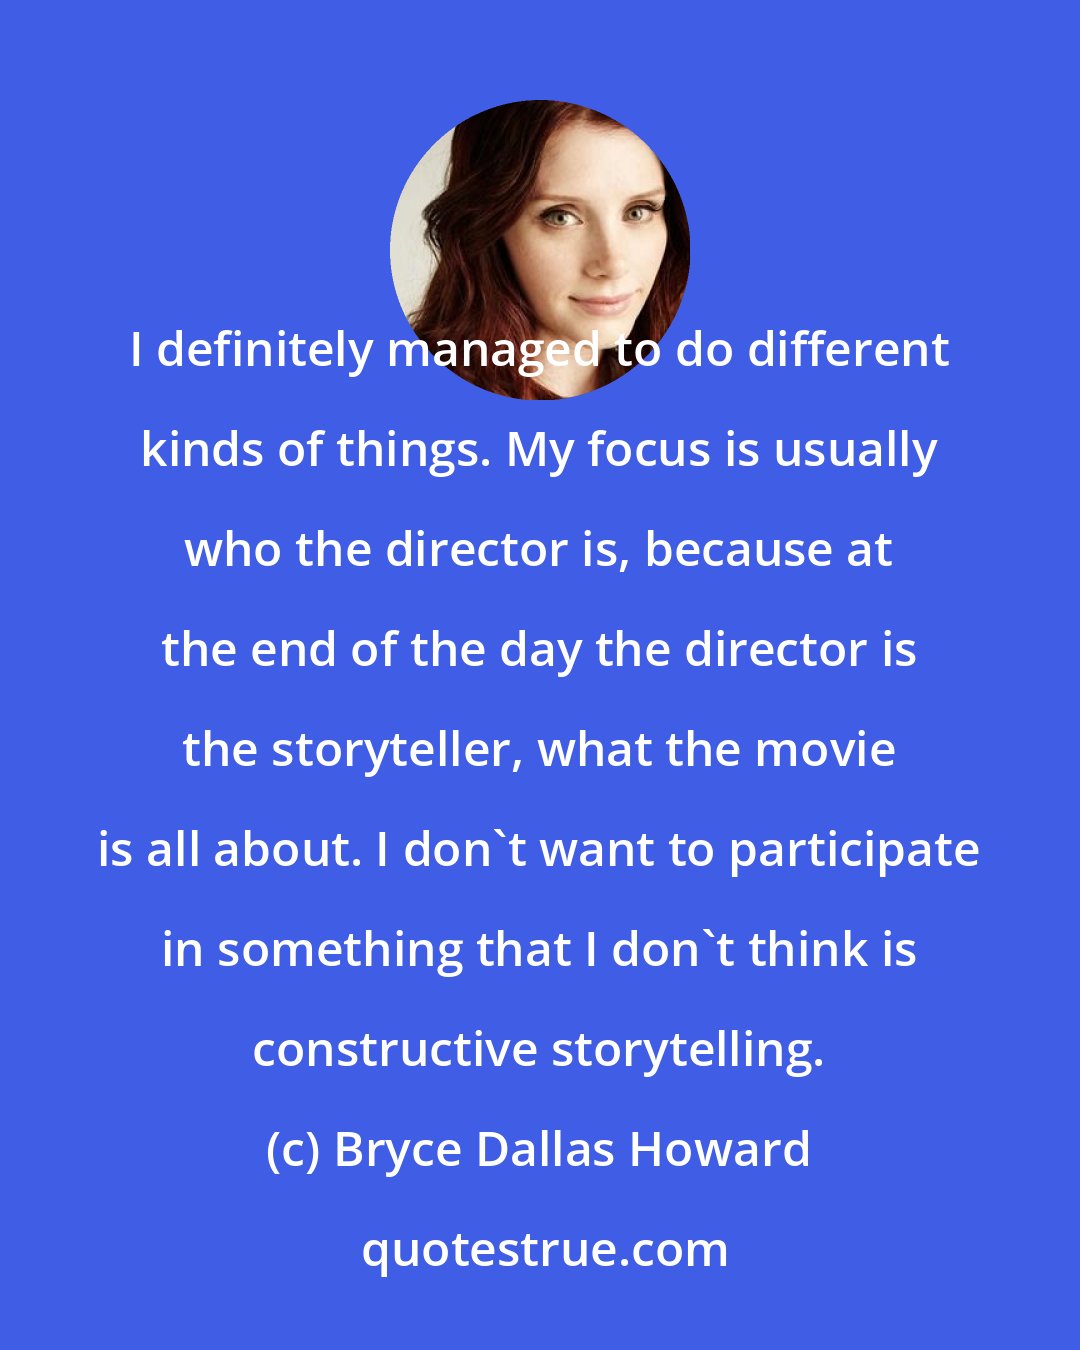 Bryce Dallas Howard: I definitely managed to do different kinds of things. My focus is usually who the director is, because at the end of the day the director is the storyteller, what the movie is all about. I don't want to participate in something that I don't think is constructive storytelling.